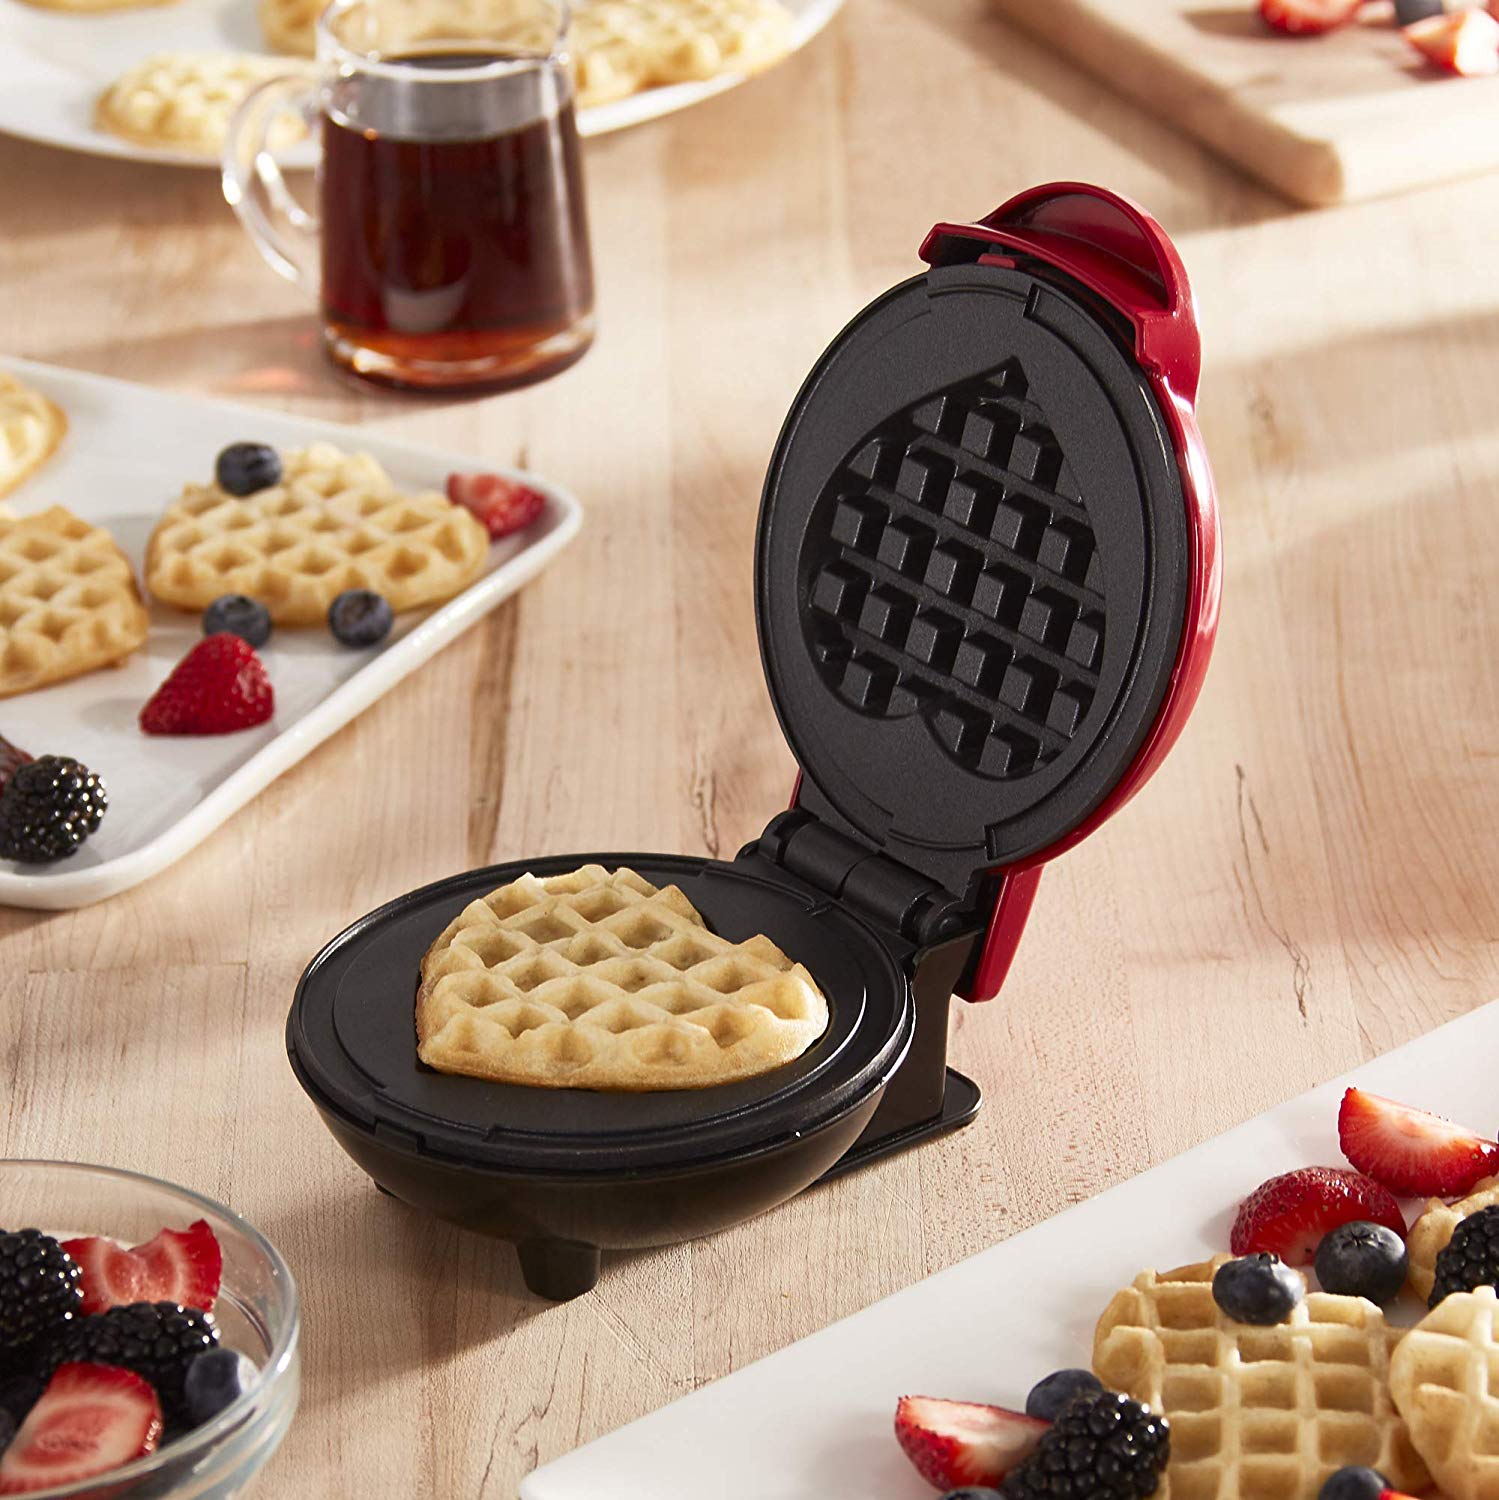 This Heart-Shaped Waffle Maker Is The Ultimate Self-Care Accessory